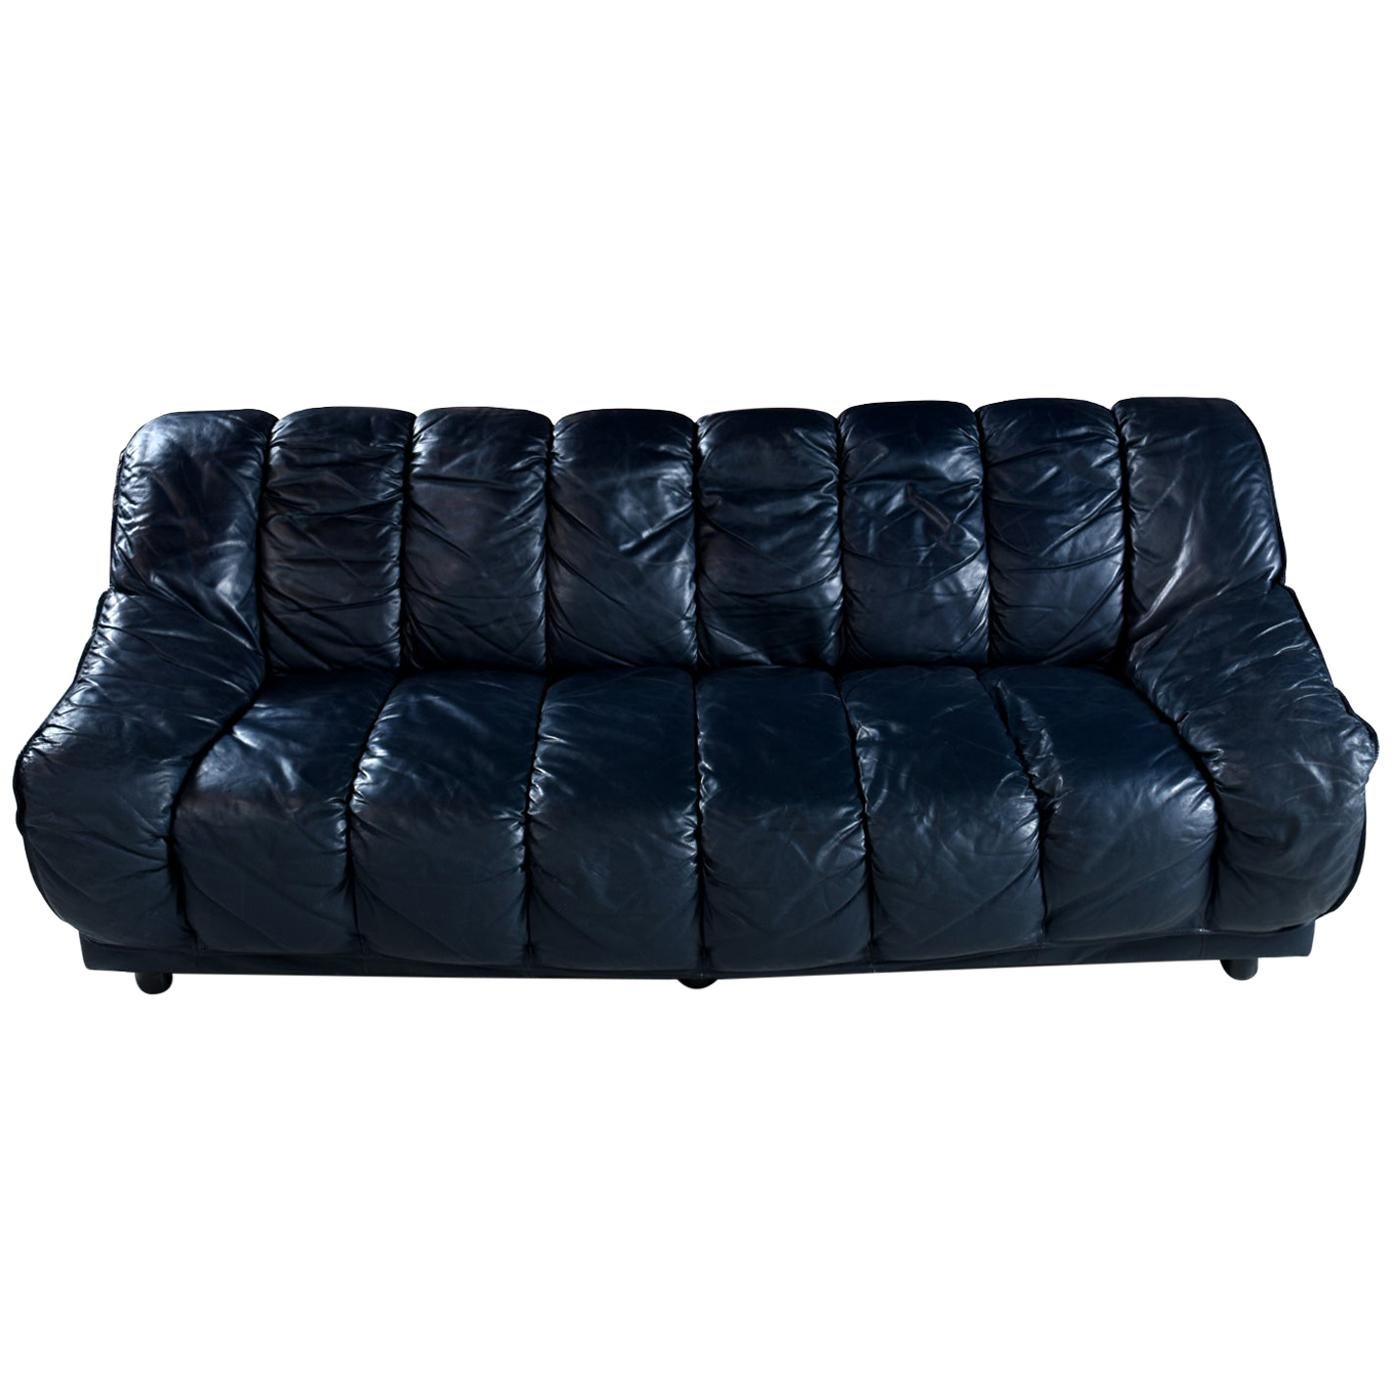 This luxurious Italian leather armchair challenges the eye. It does appear to be black, but in the right light one can notice that the leather is actually a deep blue color. The chair sits like a dream with the amply stuffed cushions cradling the